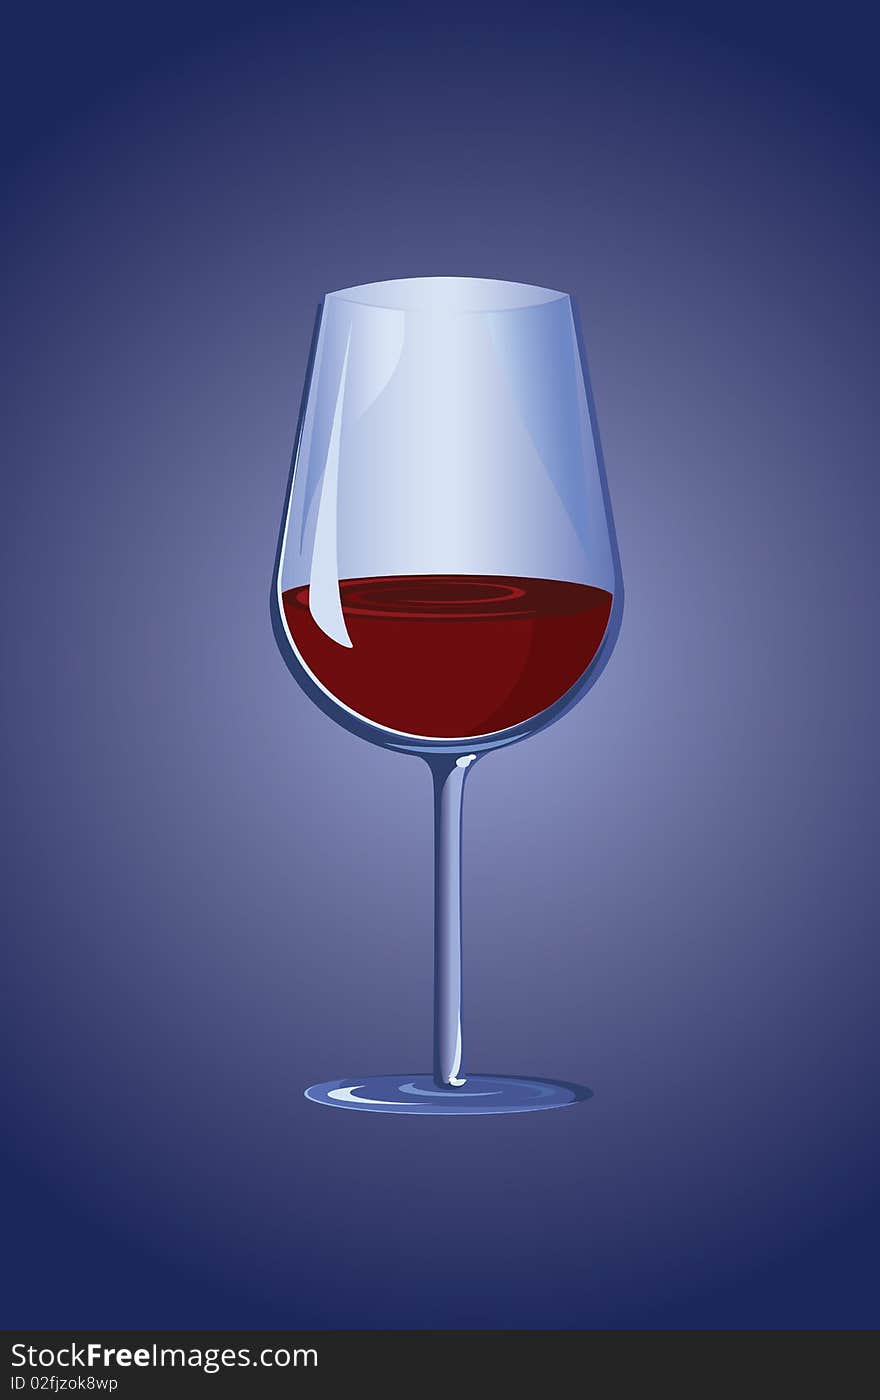 Beaker with a red wine illustration